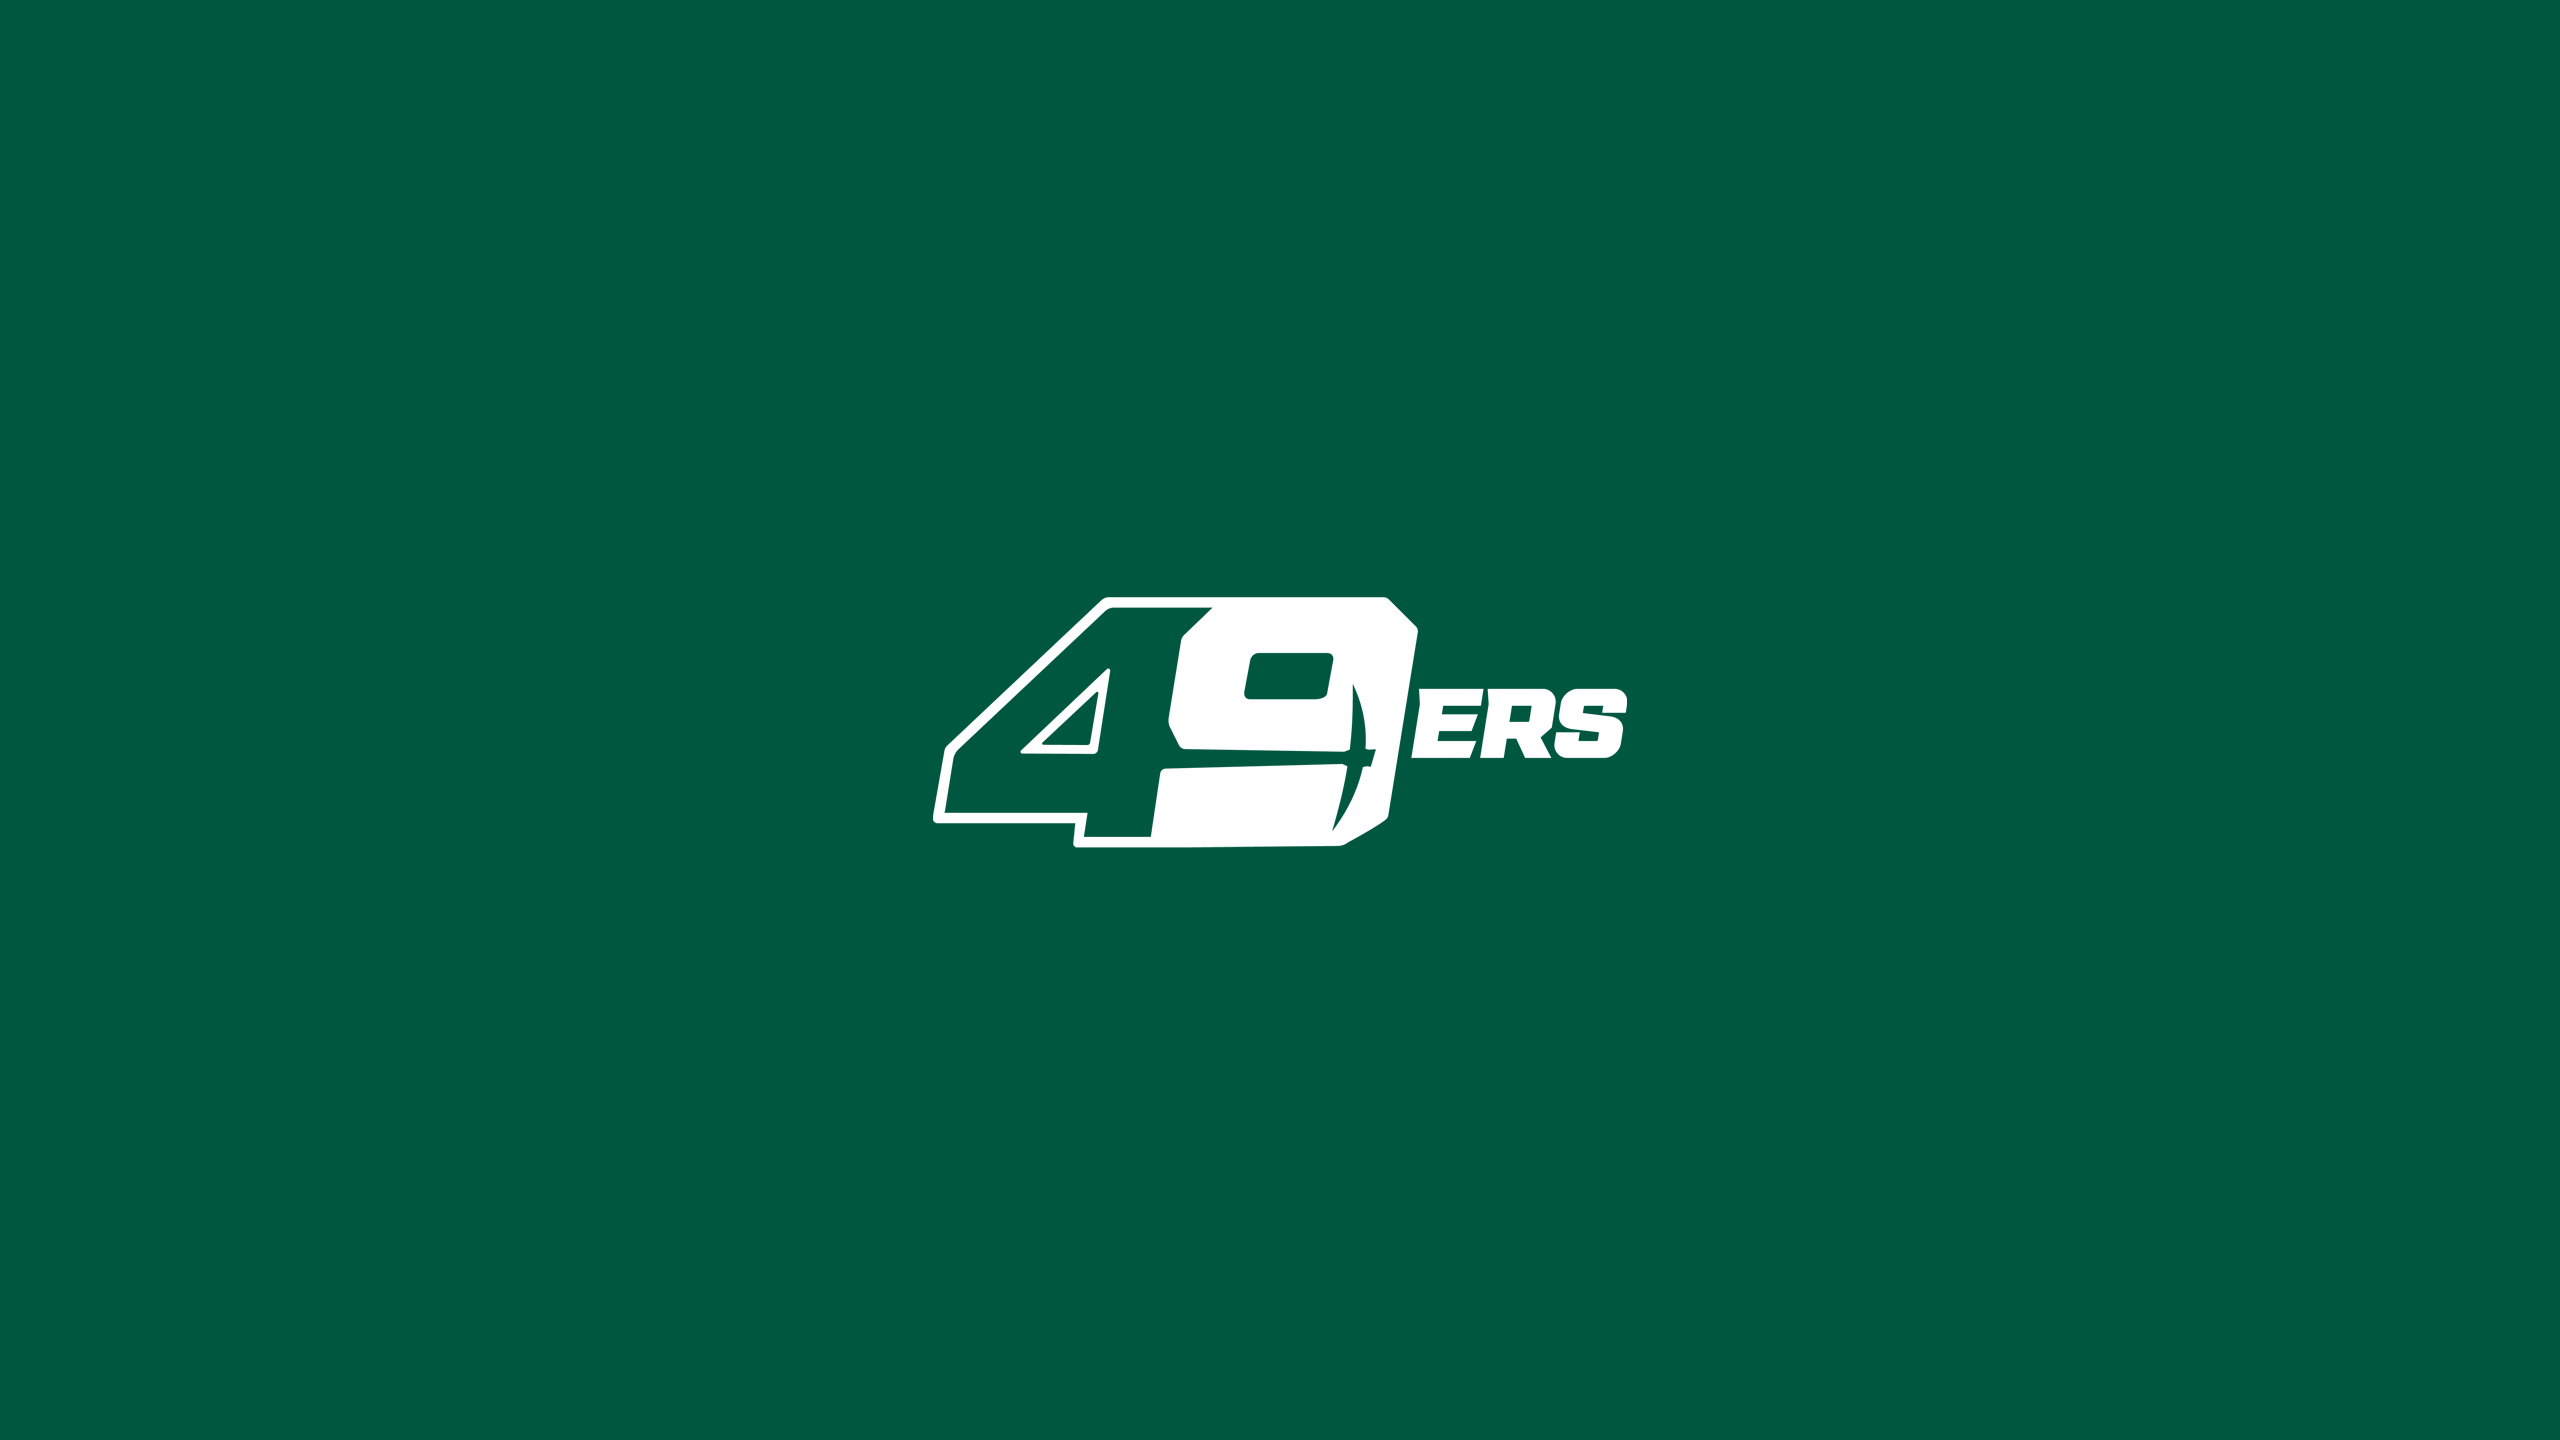 Charlotte 49ers Football - NCAAF - Square Bettor